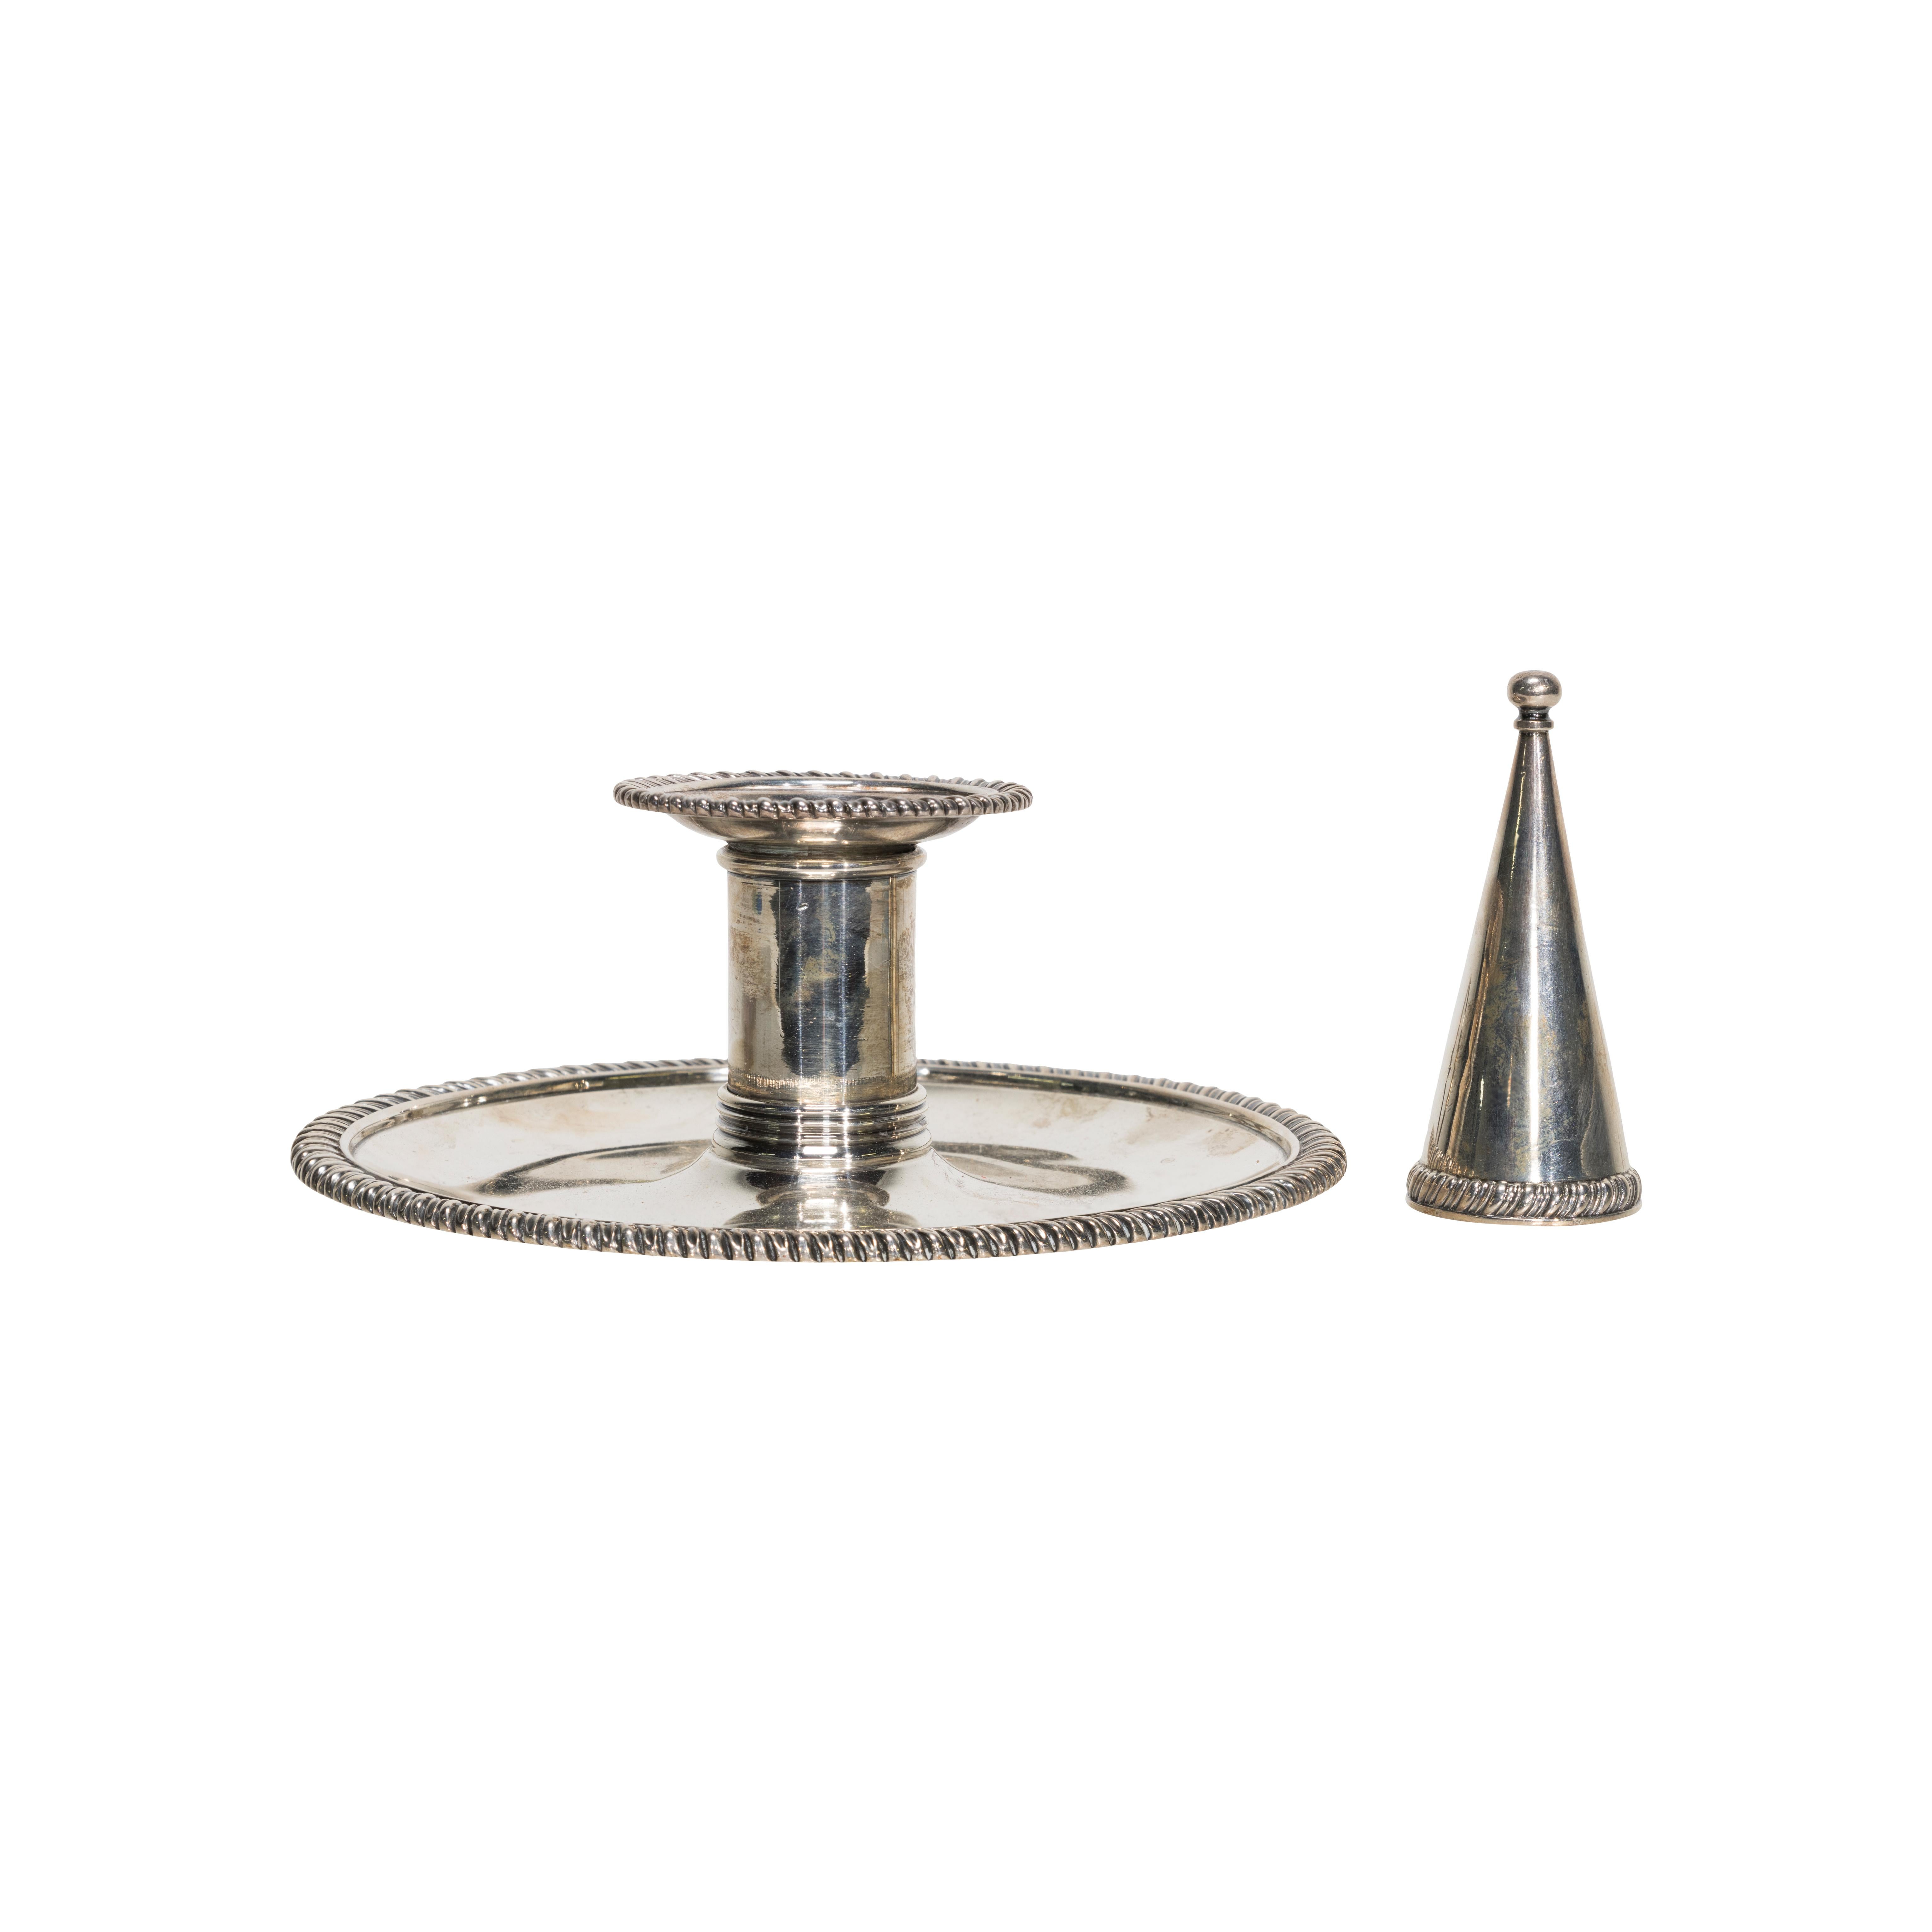 English George III sterling silver chamber candlestick by Robert Garrard II (1793 - 1881). Gadrooned border, ring handle, tray engraved with three arrows and ducal coronet, detachable candle nozzle and snuffer. London hallmarks, hallmarks illegible